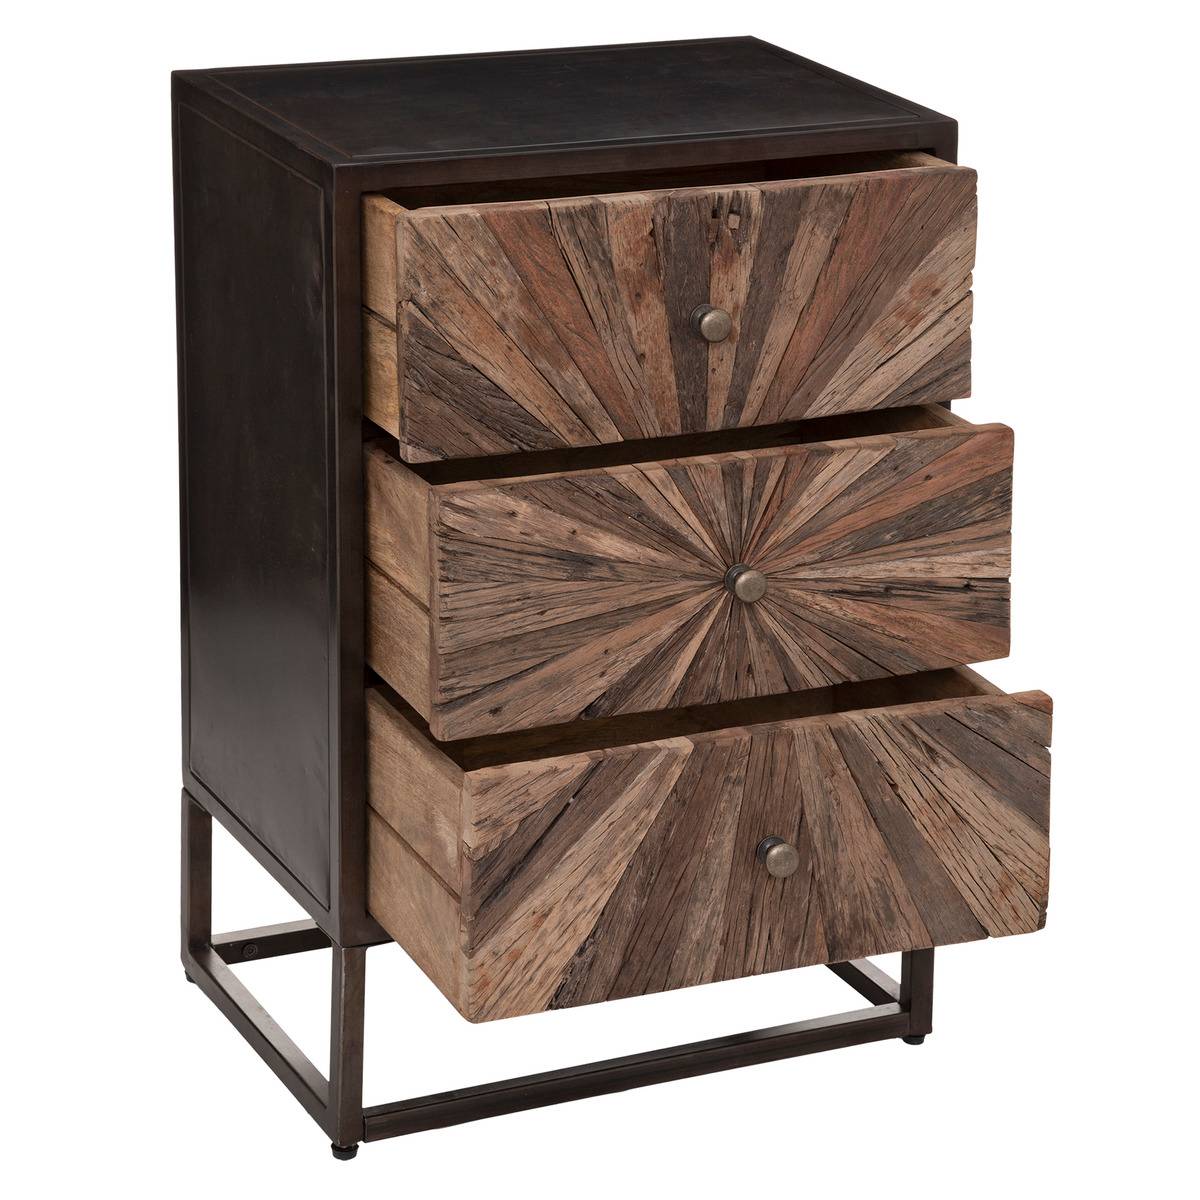 Recycled wood chiffonier 3 drawers - Rustic Furniture Outlet